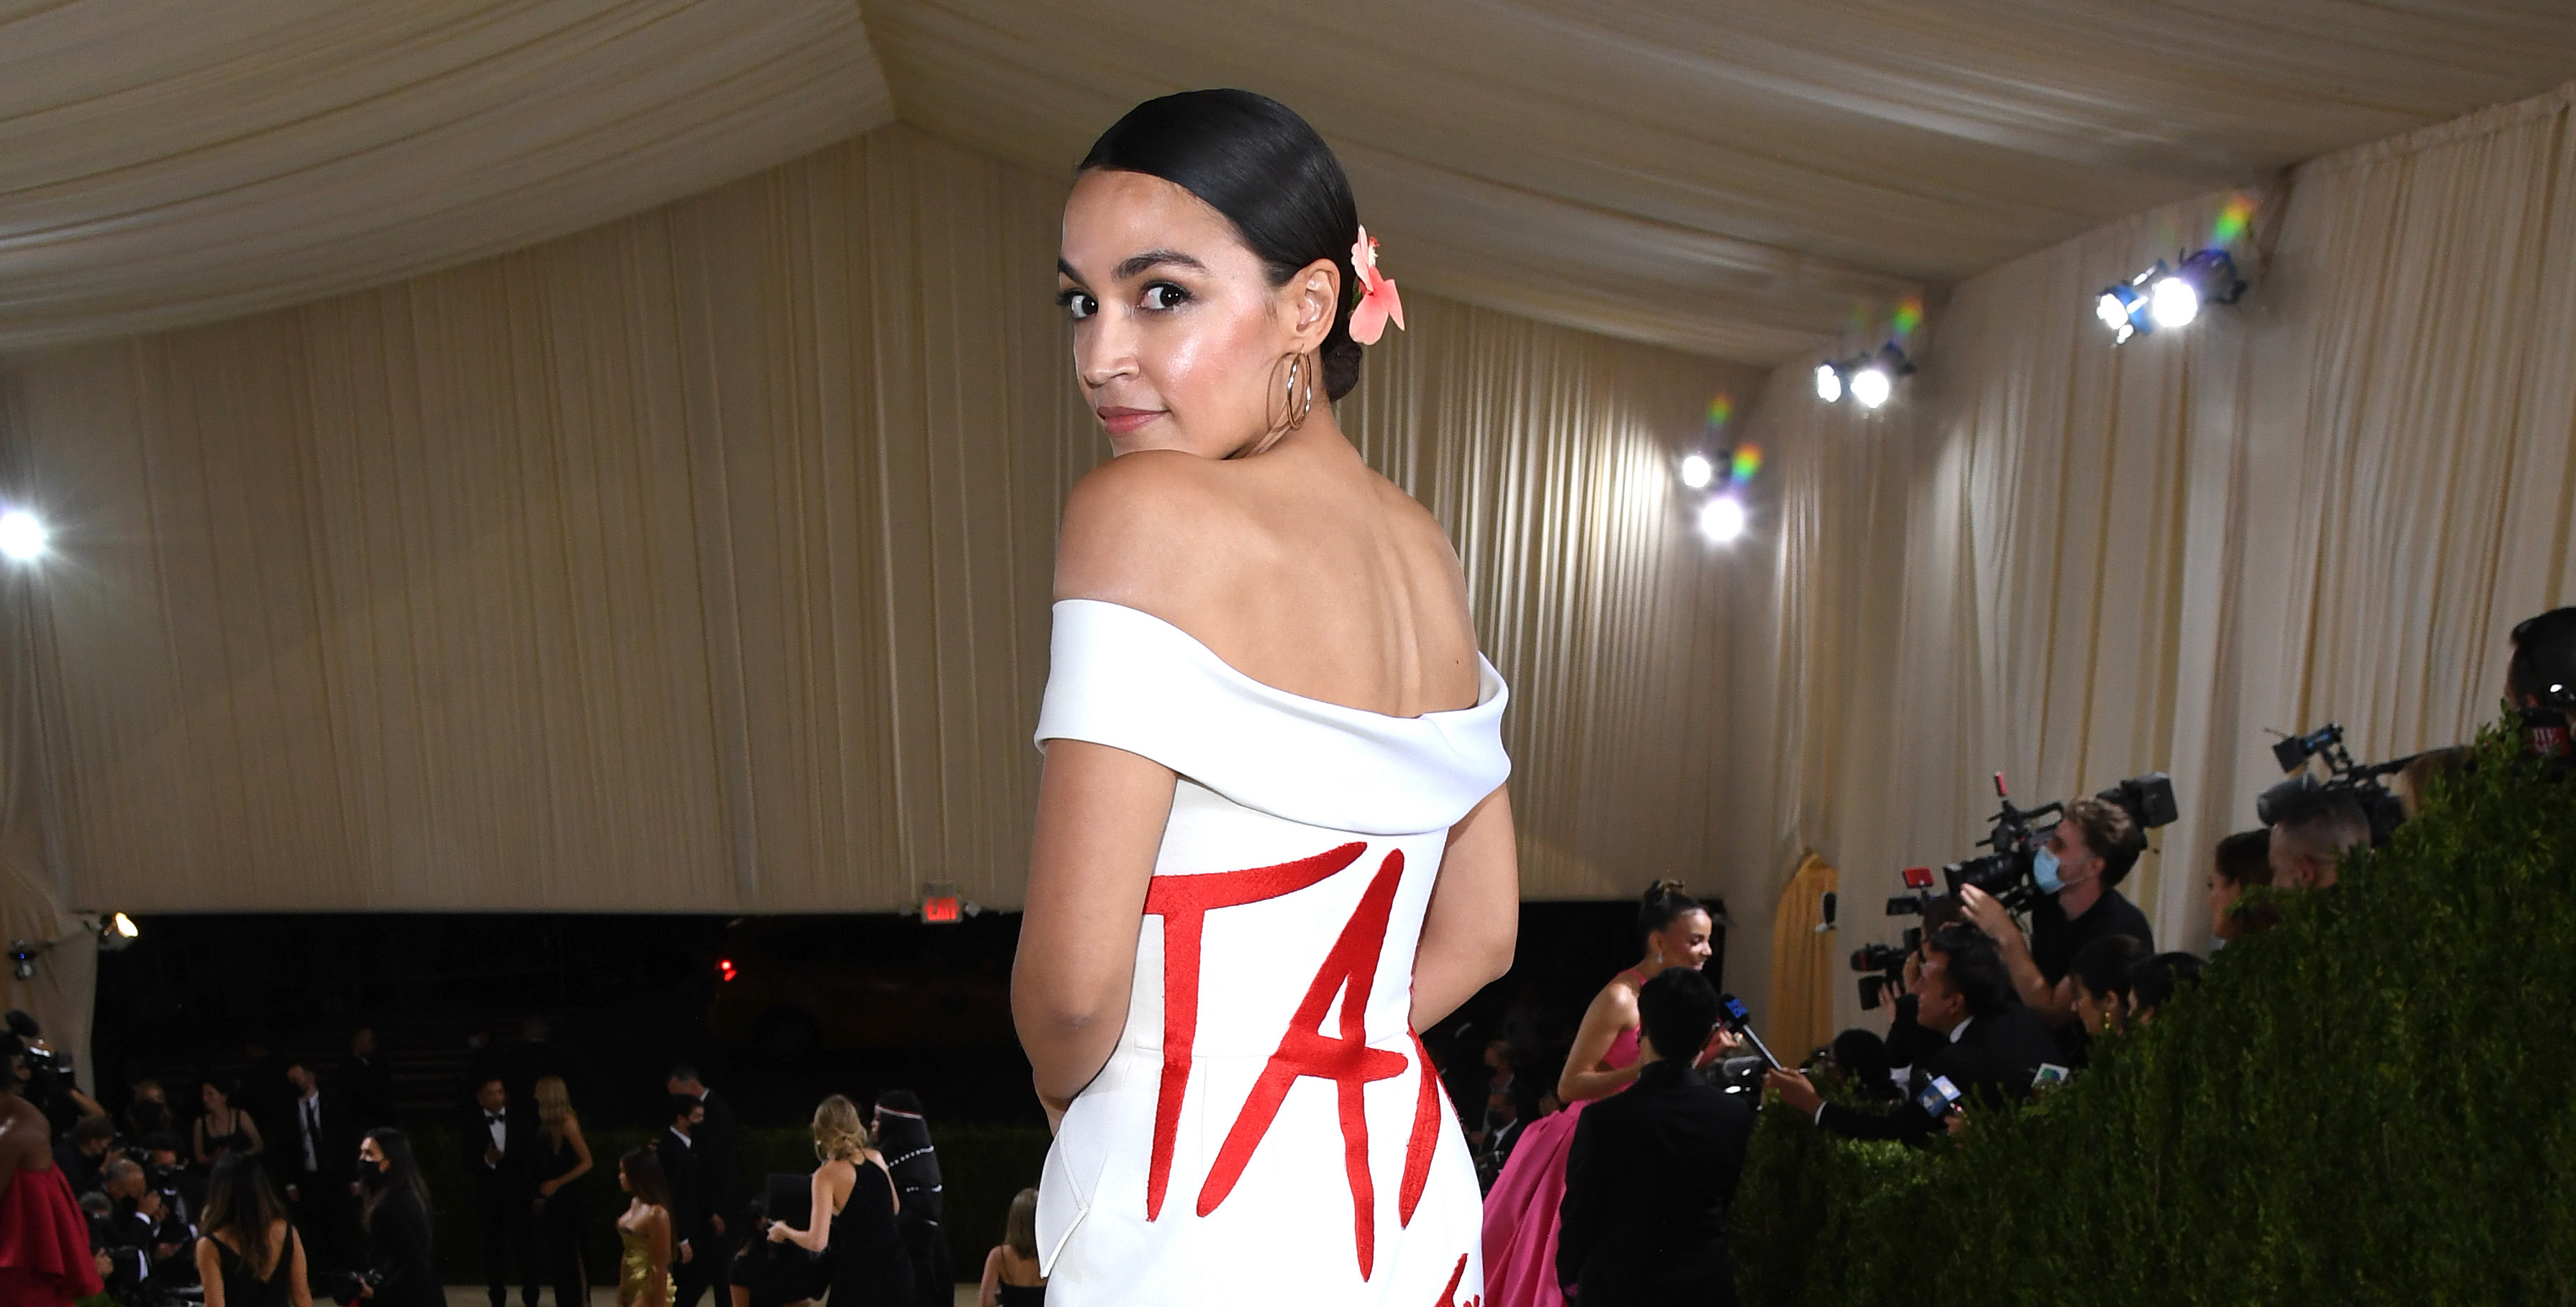 Alexandria Ocasio-Cortez Gets Mixed Reviews for 'Tax the Rich' Dress Worn at Met Gala